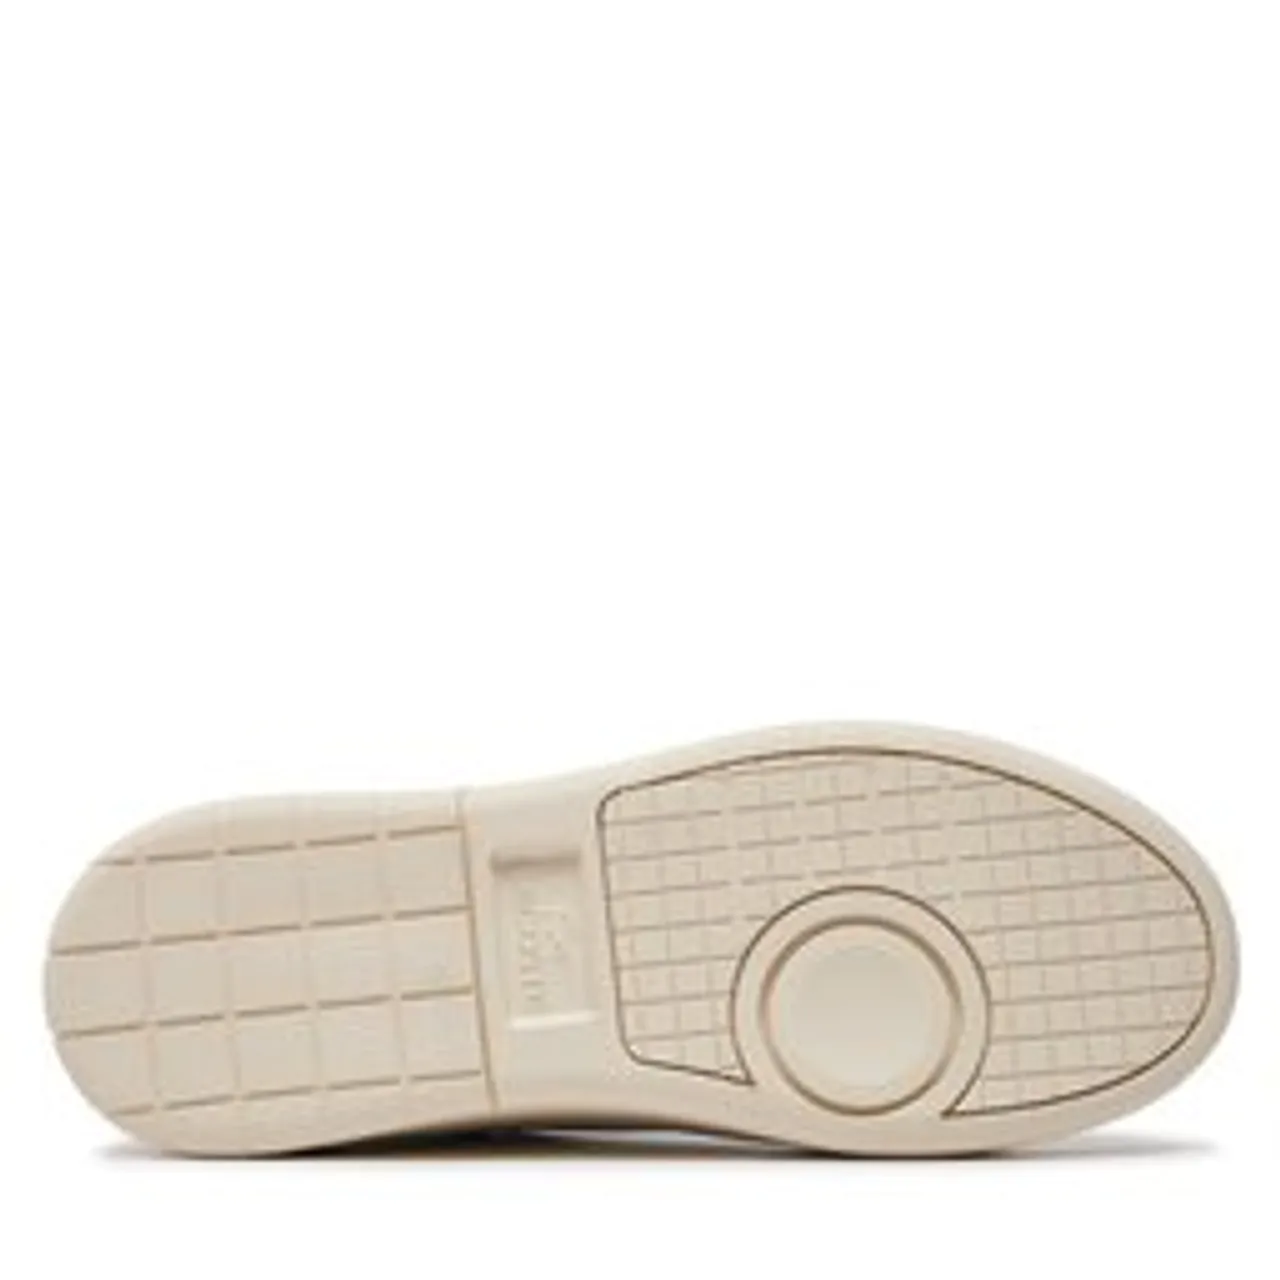 Sneakers Lacoste Carnaby Platform 745SFA0040 Wht/Off Wht 65T